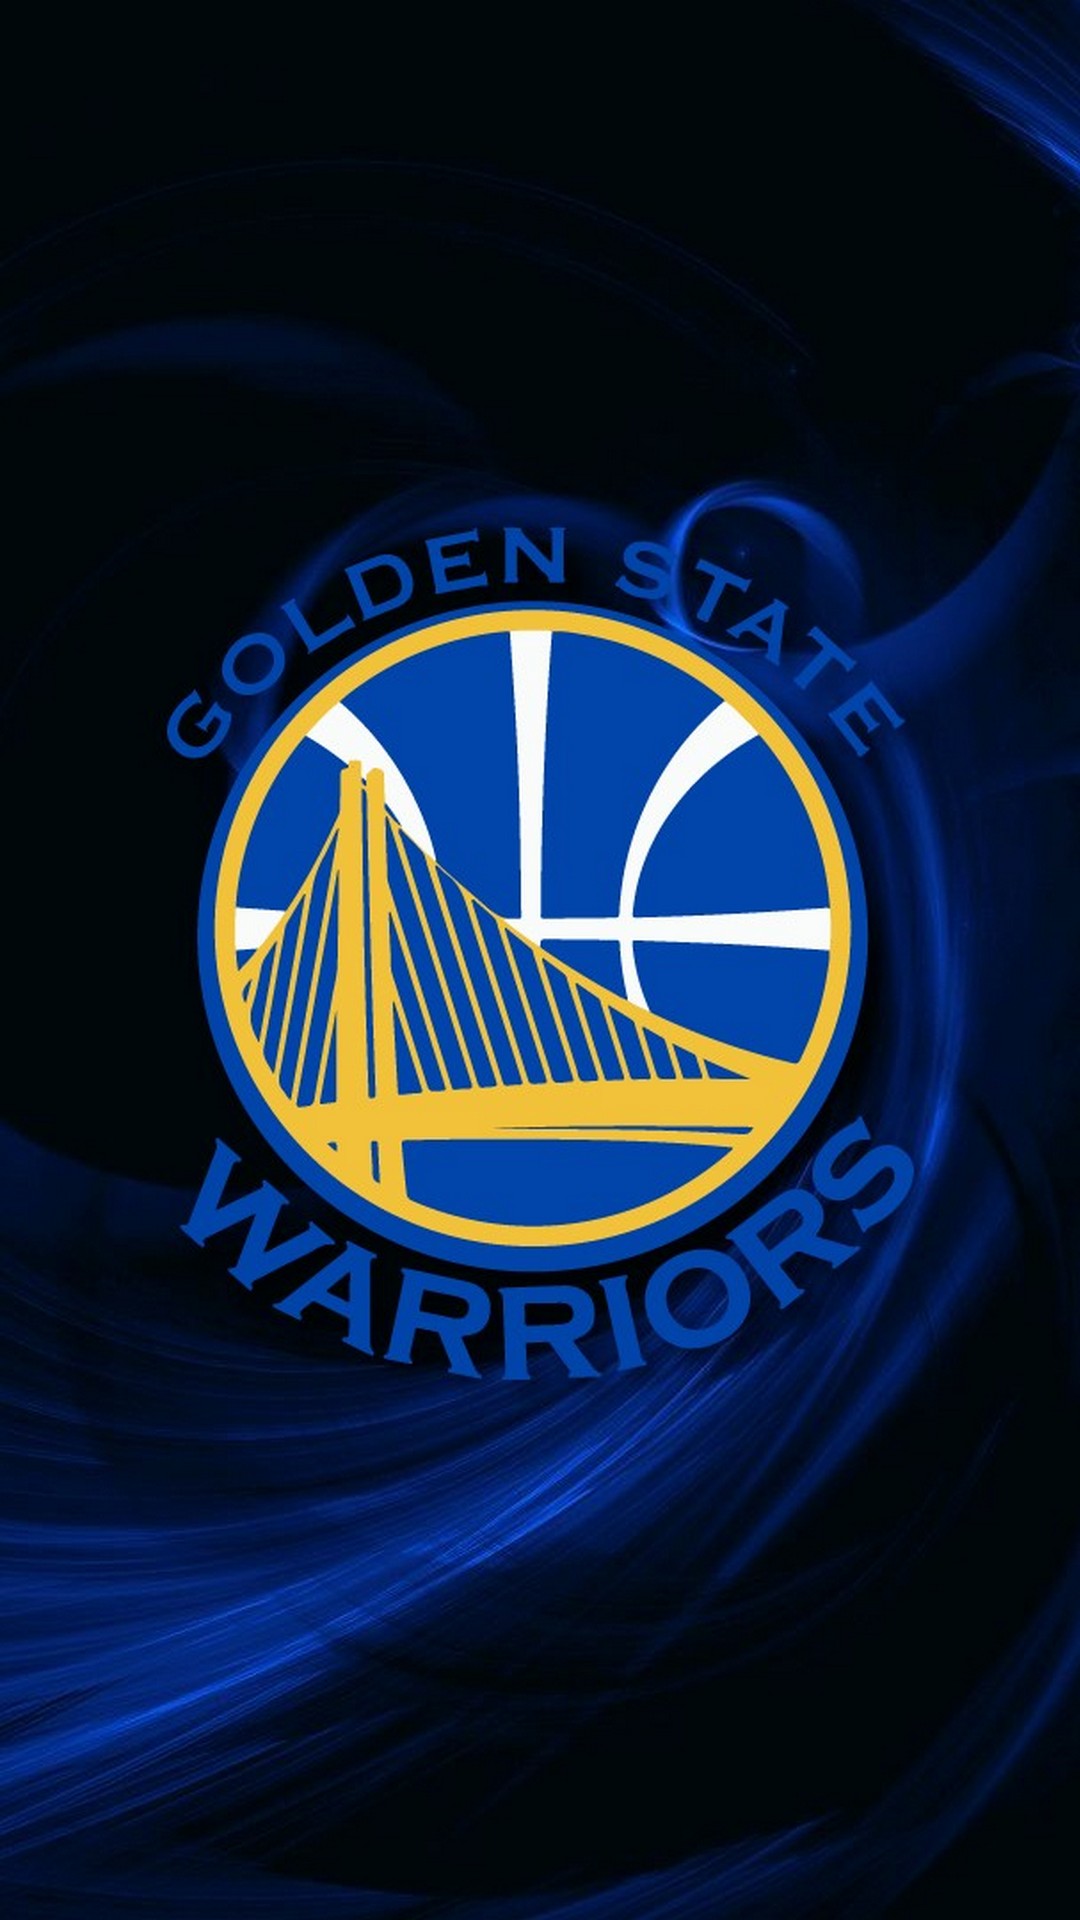 Golden State Wallpaper iPhone HD with image dimensions 1080x1920 pixel. You can make this wallpaper for your Desktop Computer Backgrounds, Windows or Mac Screensavers, iPhone Lock screen, Tablet or Android and another Mobile Phone device